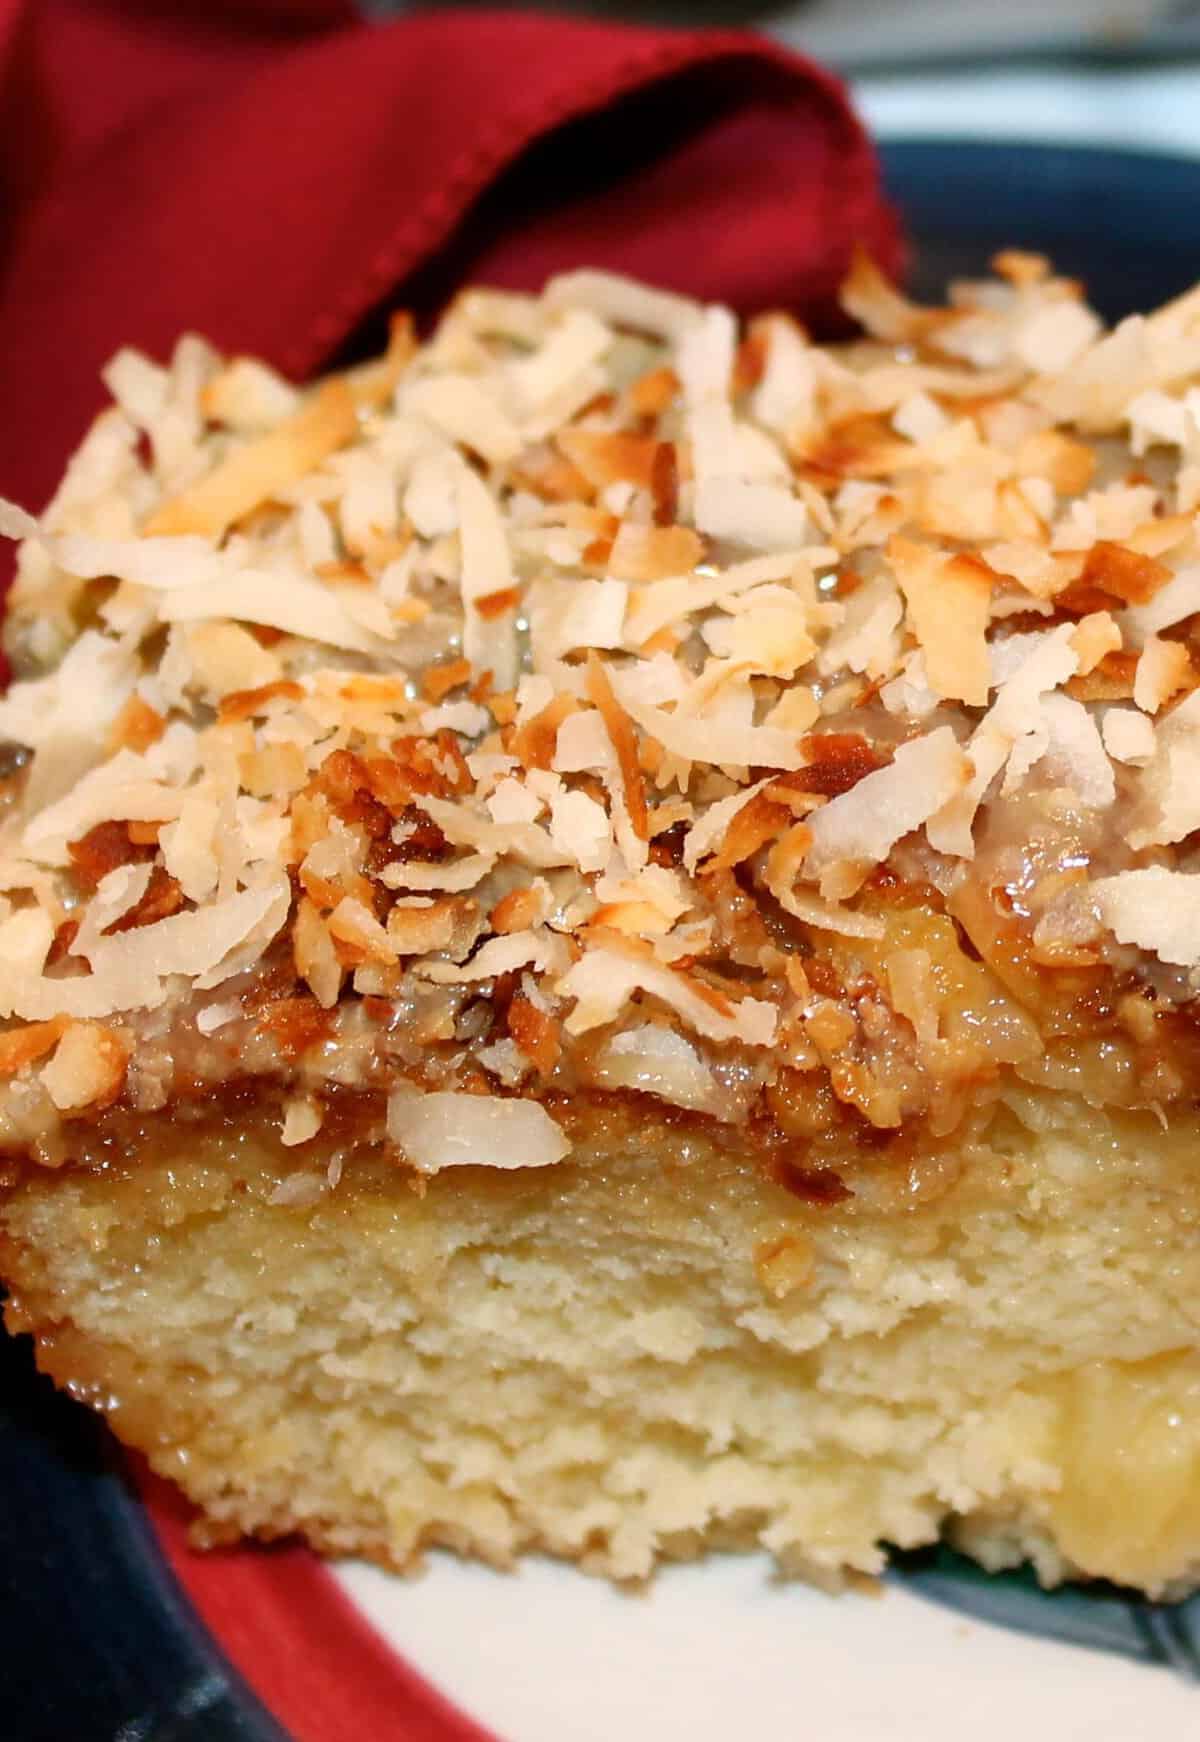  Bring a taste of the South to your kitchen with this Plantation Skillet Cake.